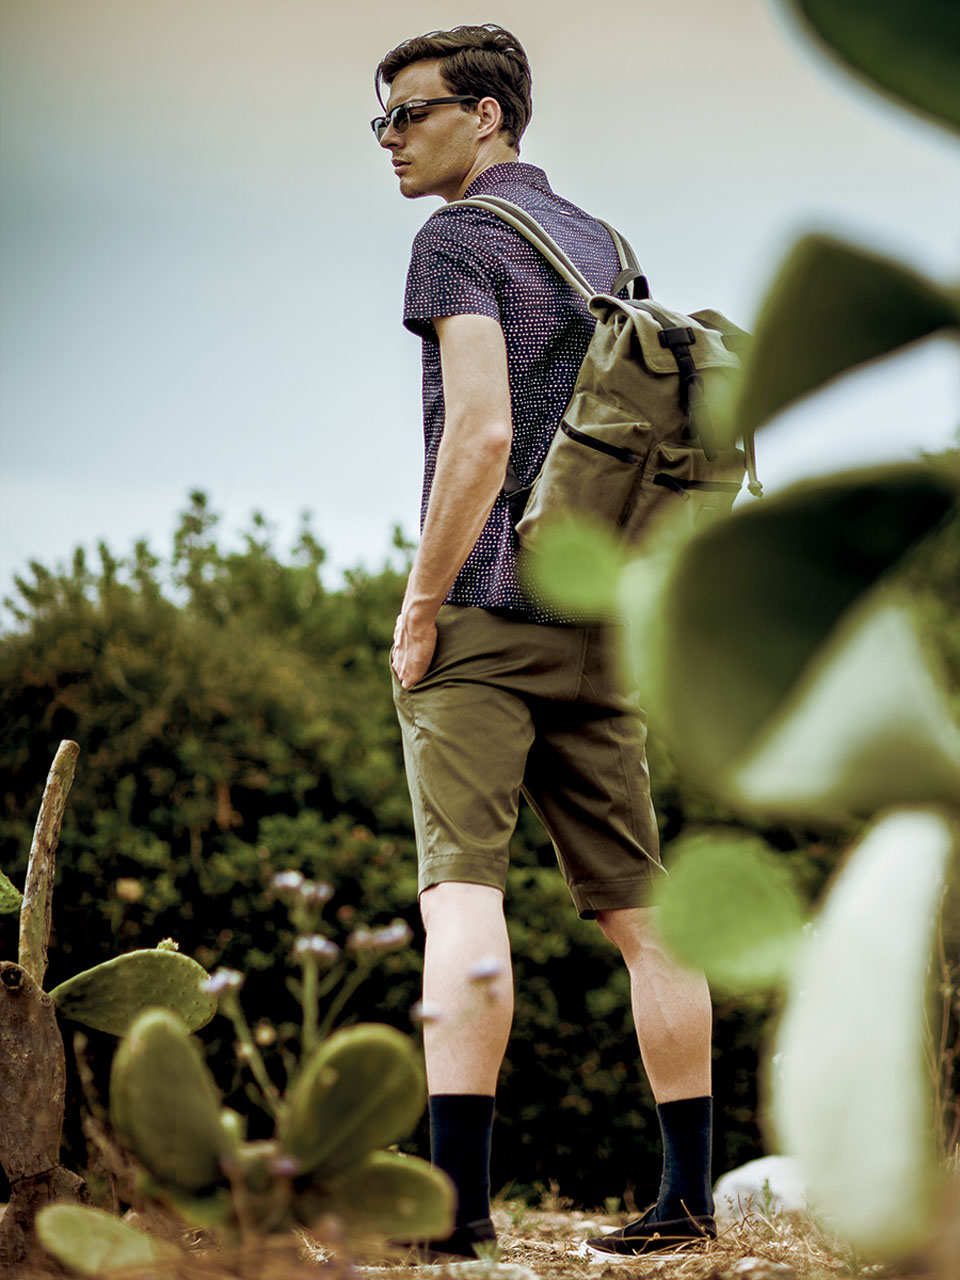 Stay stylish and adventurous with Okan for Vima Men.